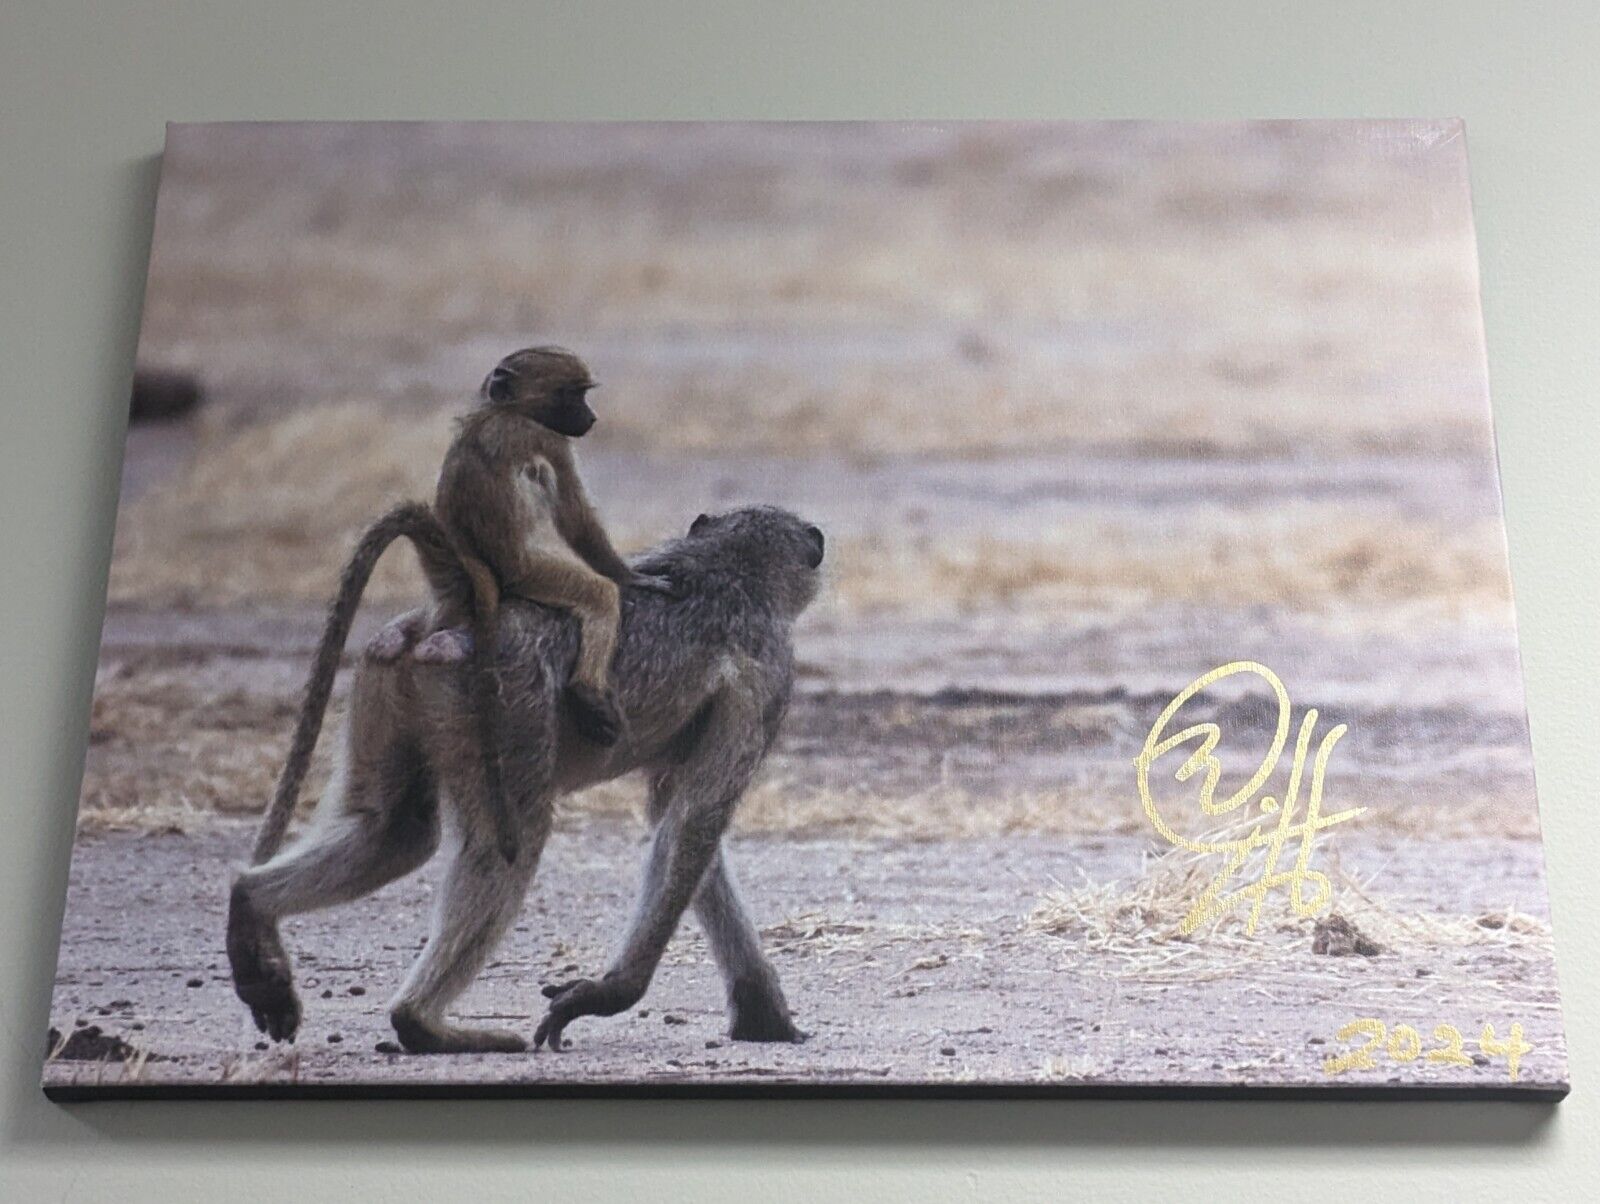 2024 ZAMBIA Signed 16X20 CANVAS Print #d 1/1 BABOON Are We There Yet? by BC Mixx